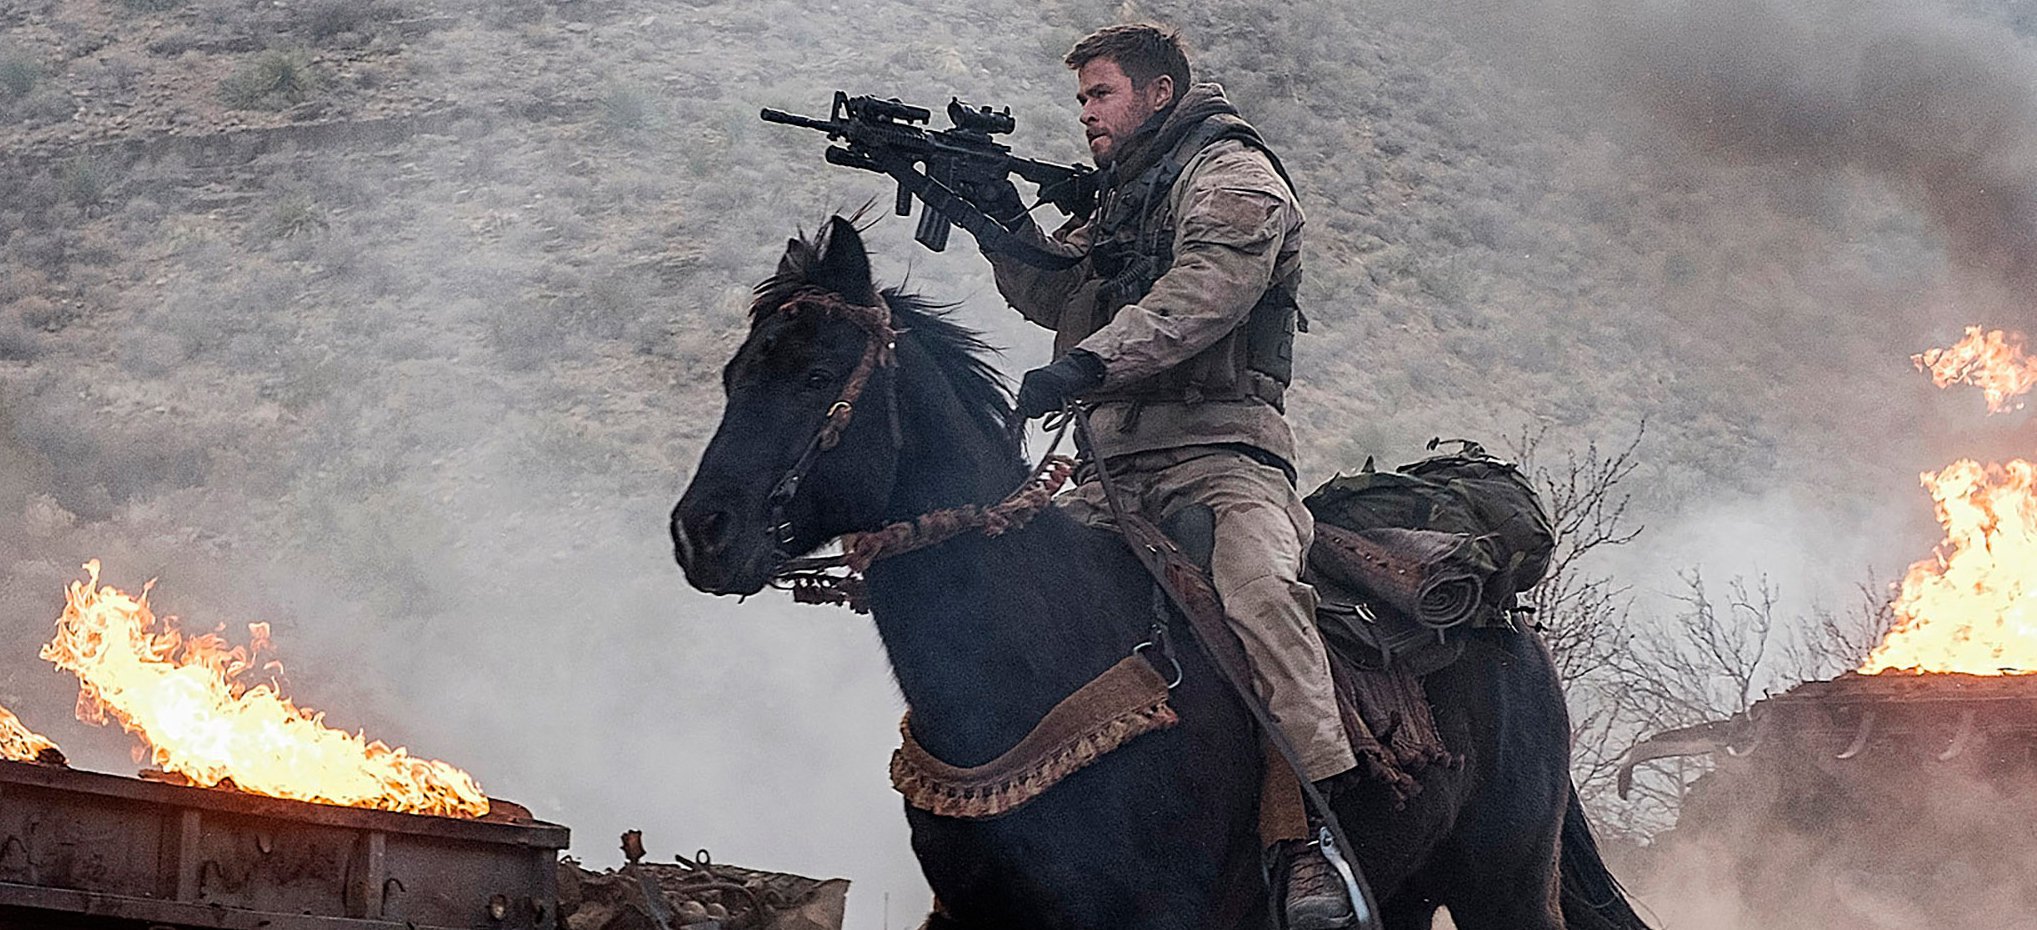 Movie Review for the new war action drama 12 STRONG, now playing in theatres. | Movie Review for the new war action drama 12 STRONG, now playing in theatres.